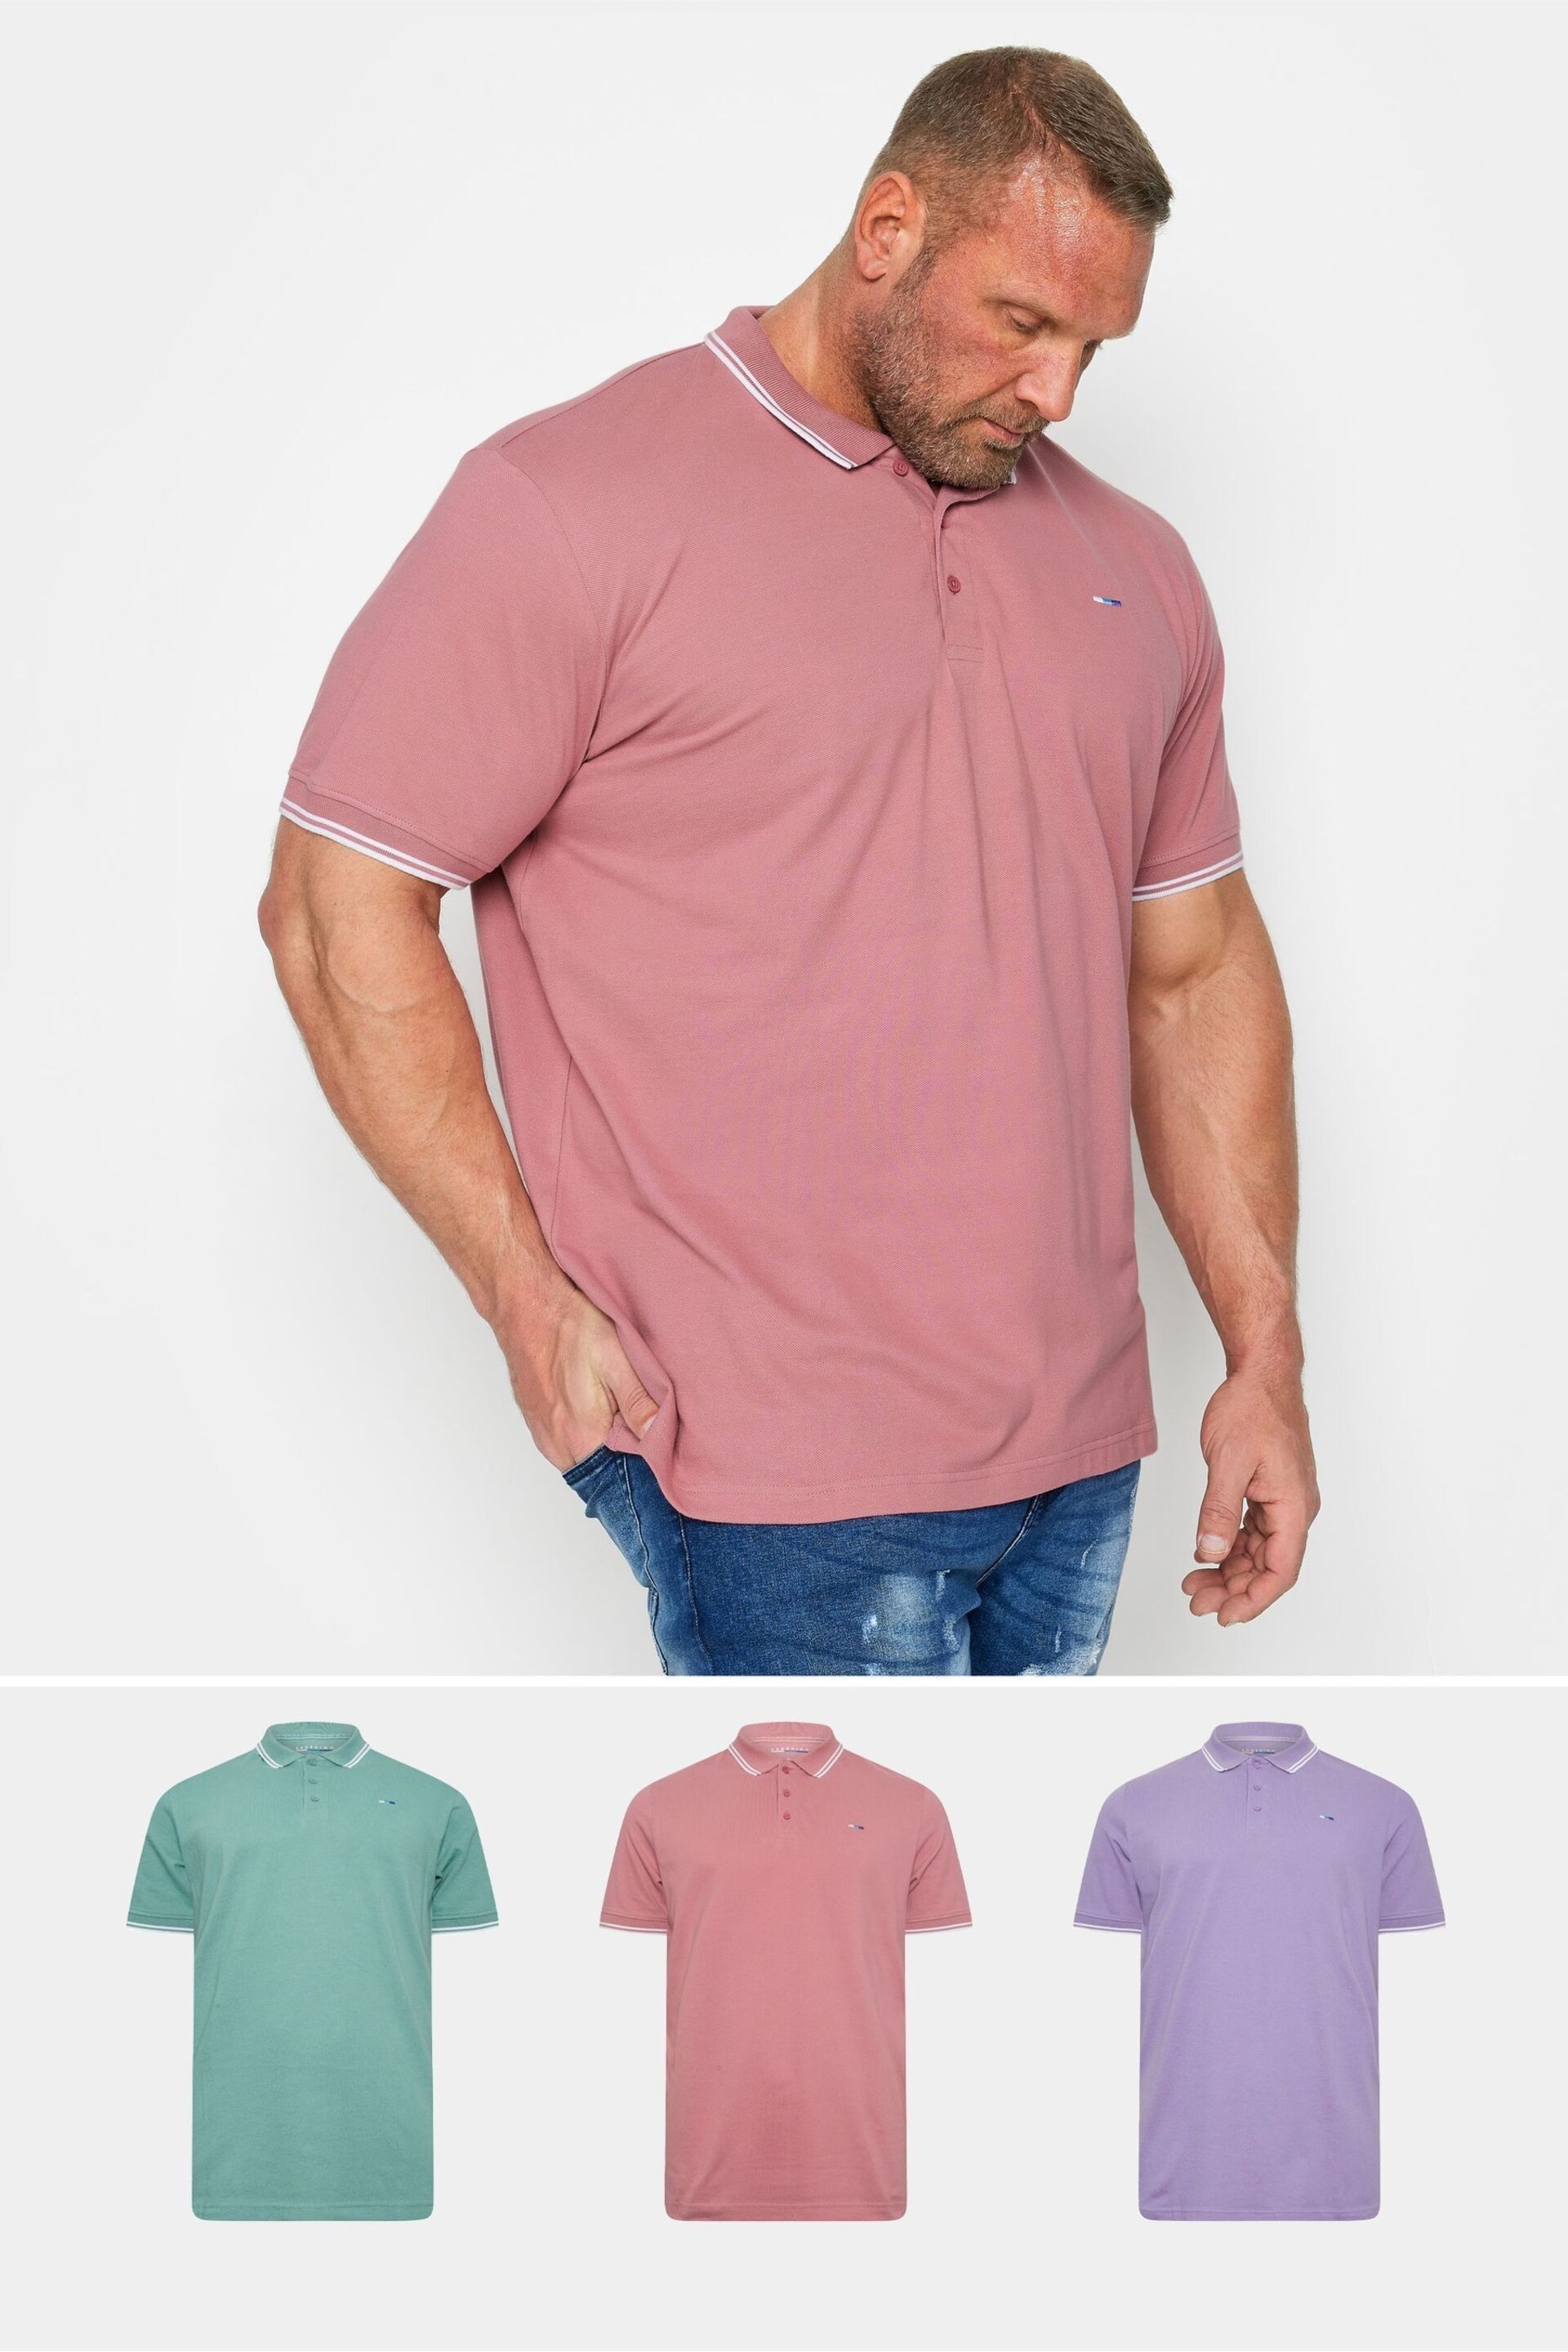 BadRhino Big & Tall Mineral Blue/Rose Pink/Violet Purple 3 Pack Tipped Polo Shirts - Image 1 of 6